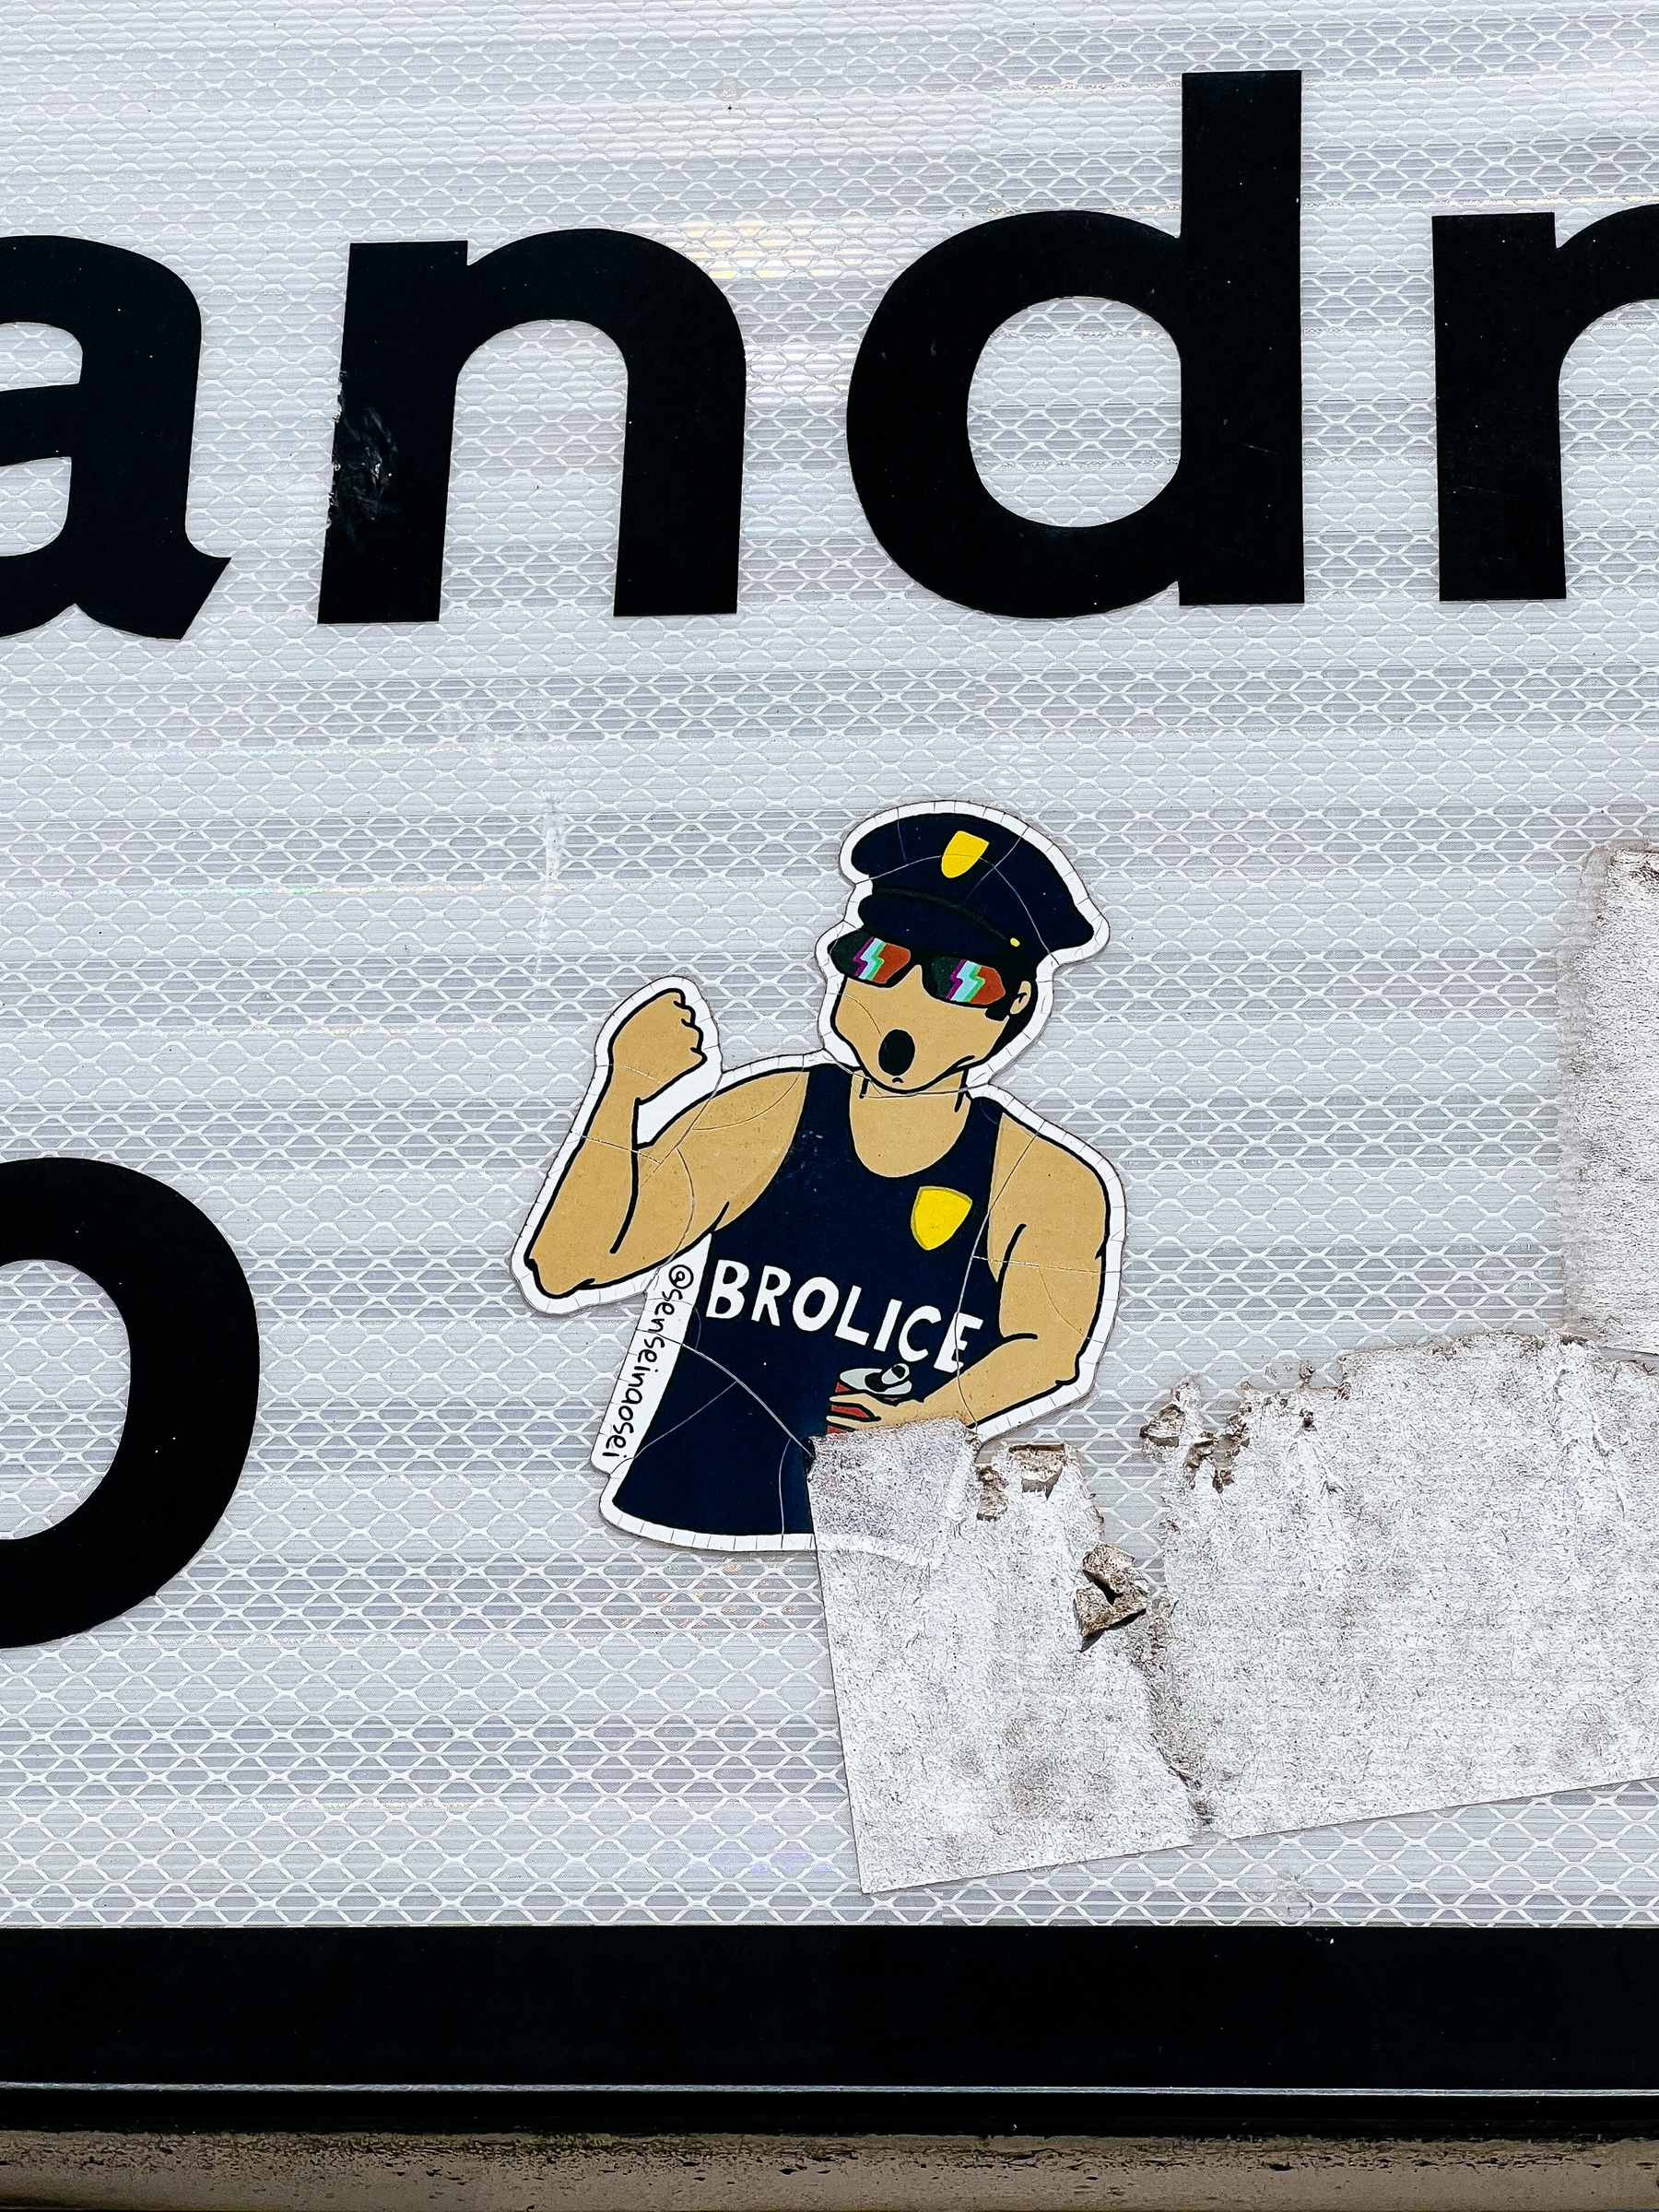 Tank top wearing police officer, with “Brolice” written on the shirt. Sticker. 